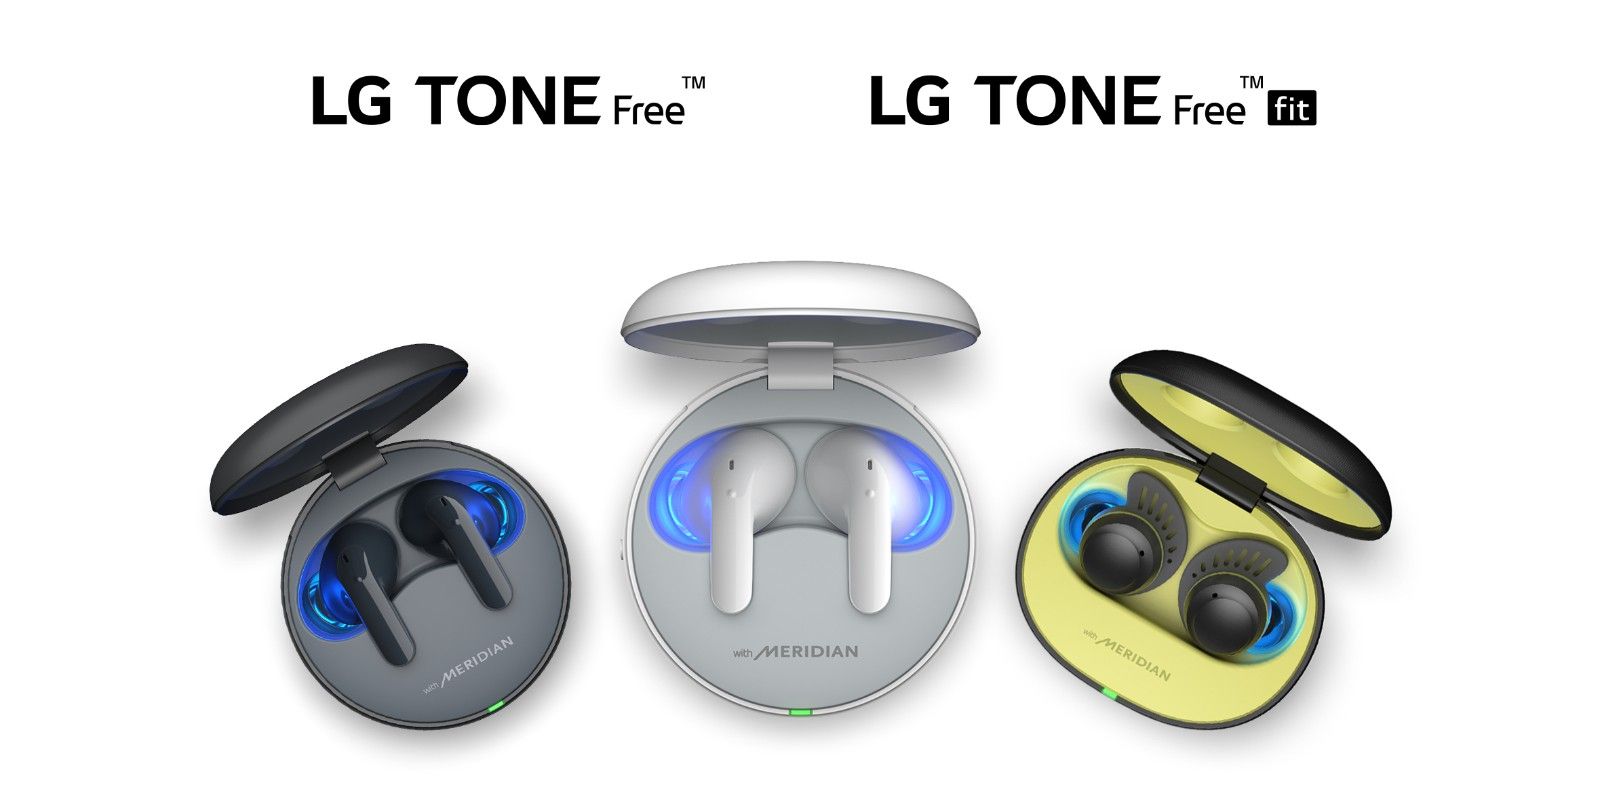 LG TONE Free earbuds for 2022